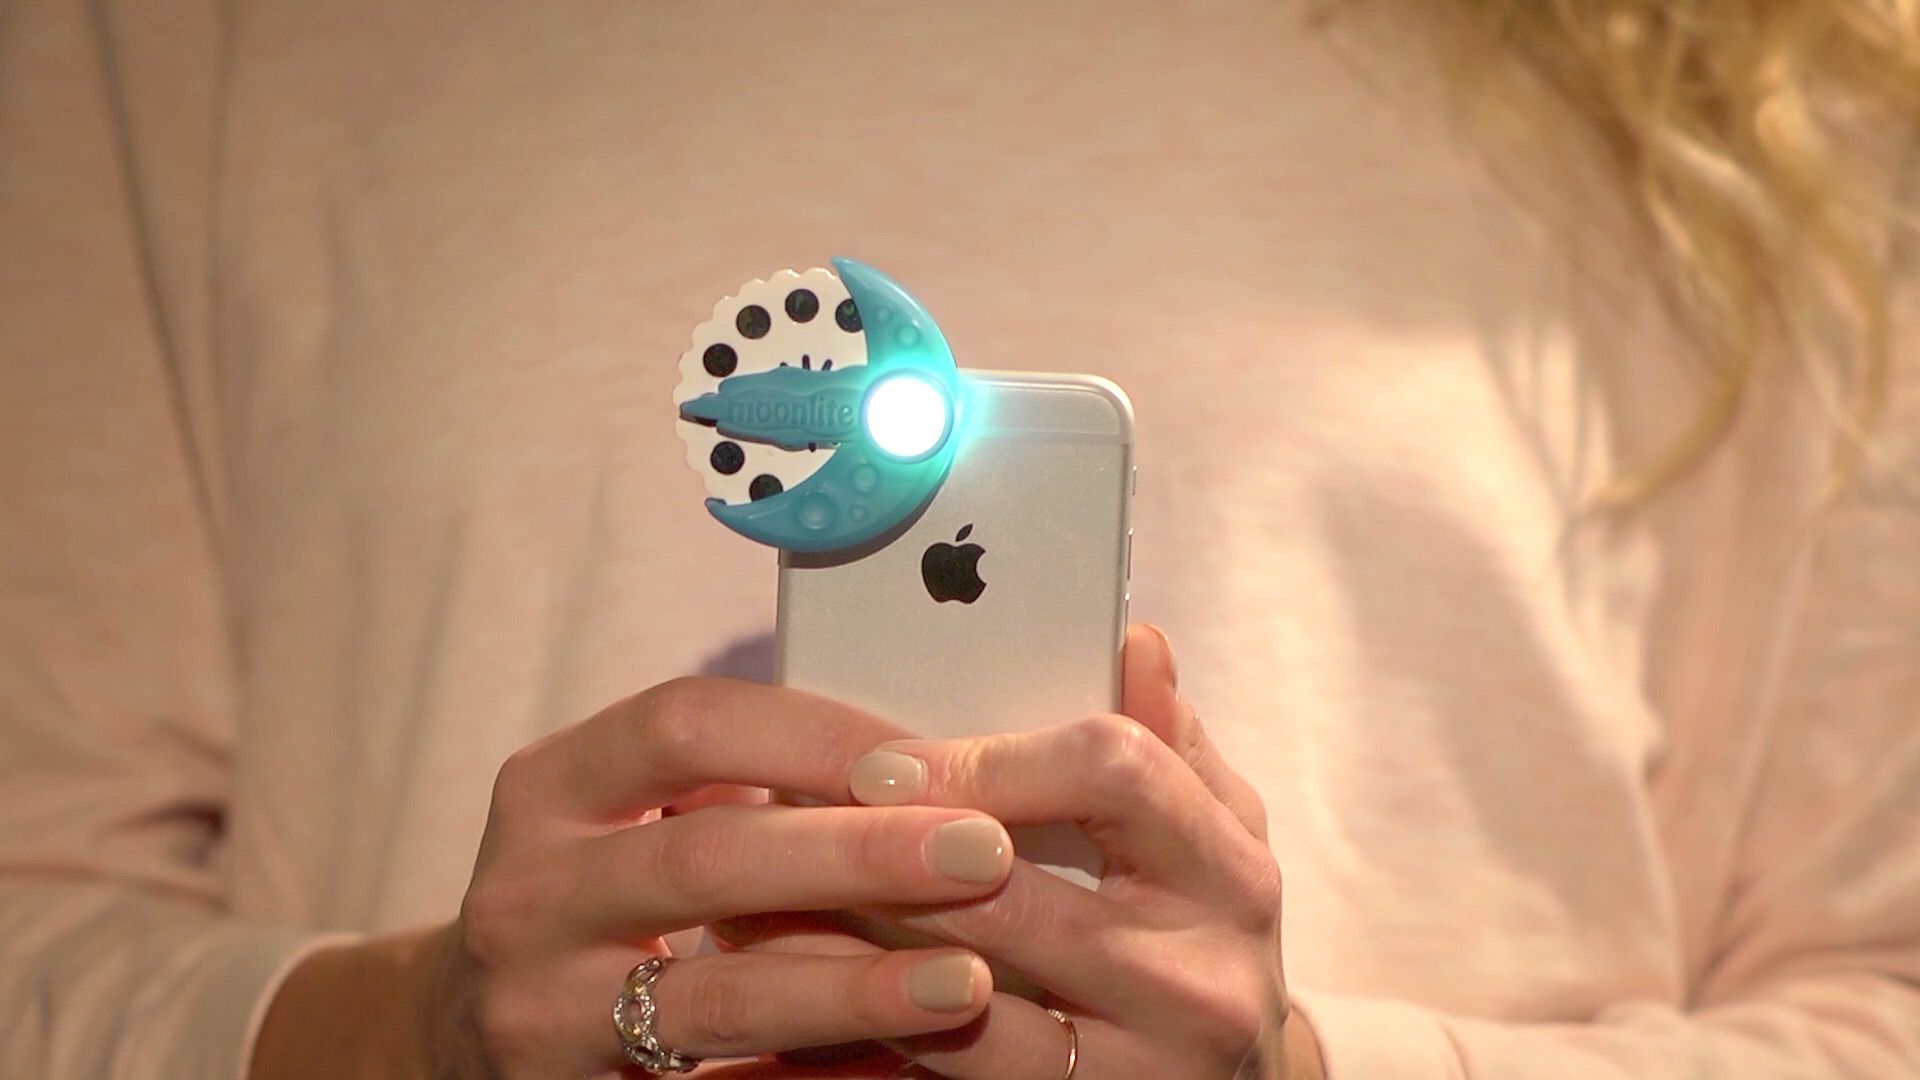 Moonlite story projector for your phone, now on Kickstarter